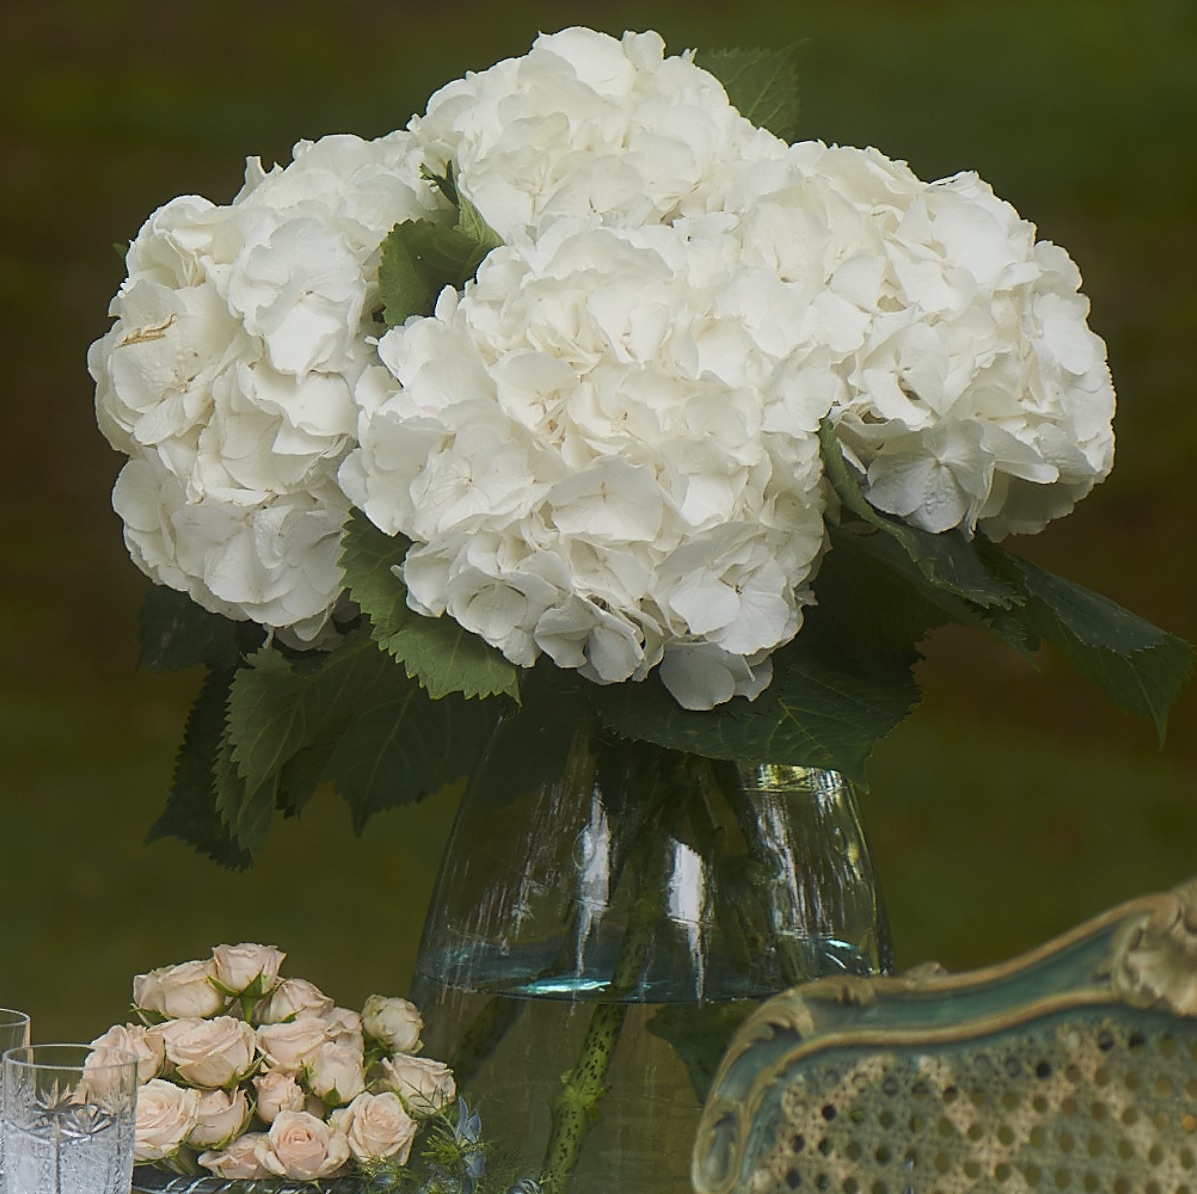 For a summer buffet, Cornelia Guest arranged big, lacy, white hydrangeas in a simple vase. 